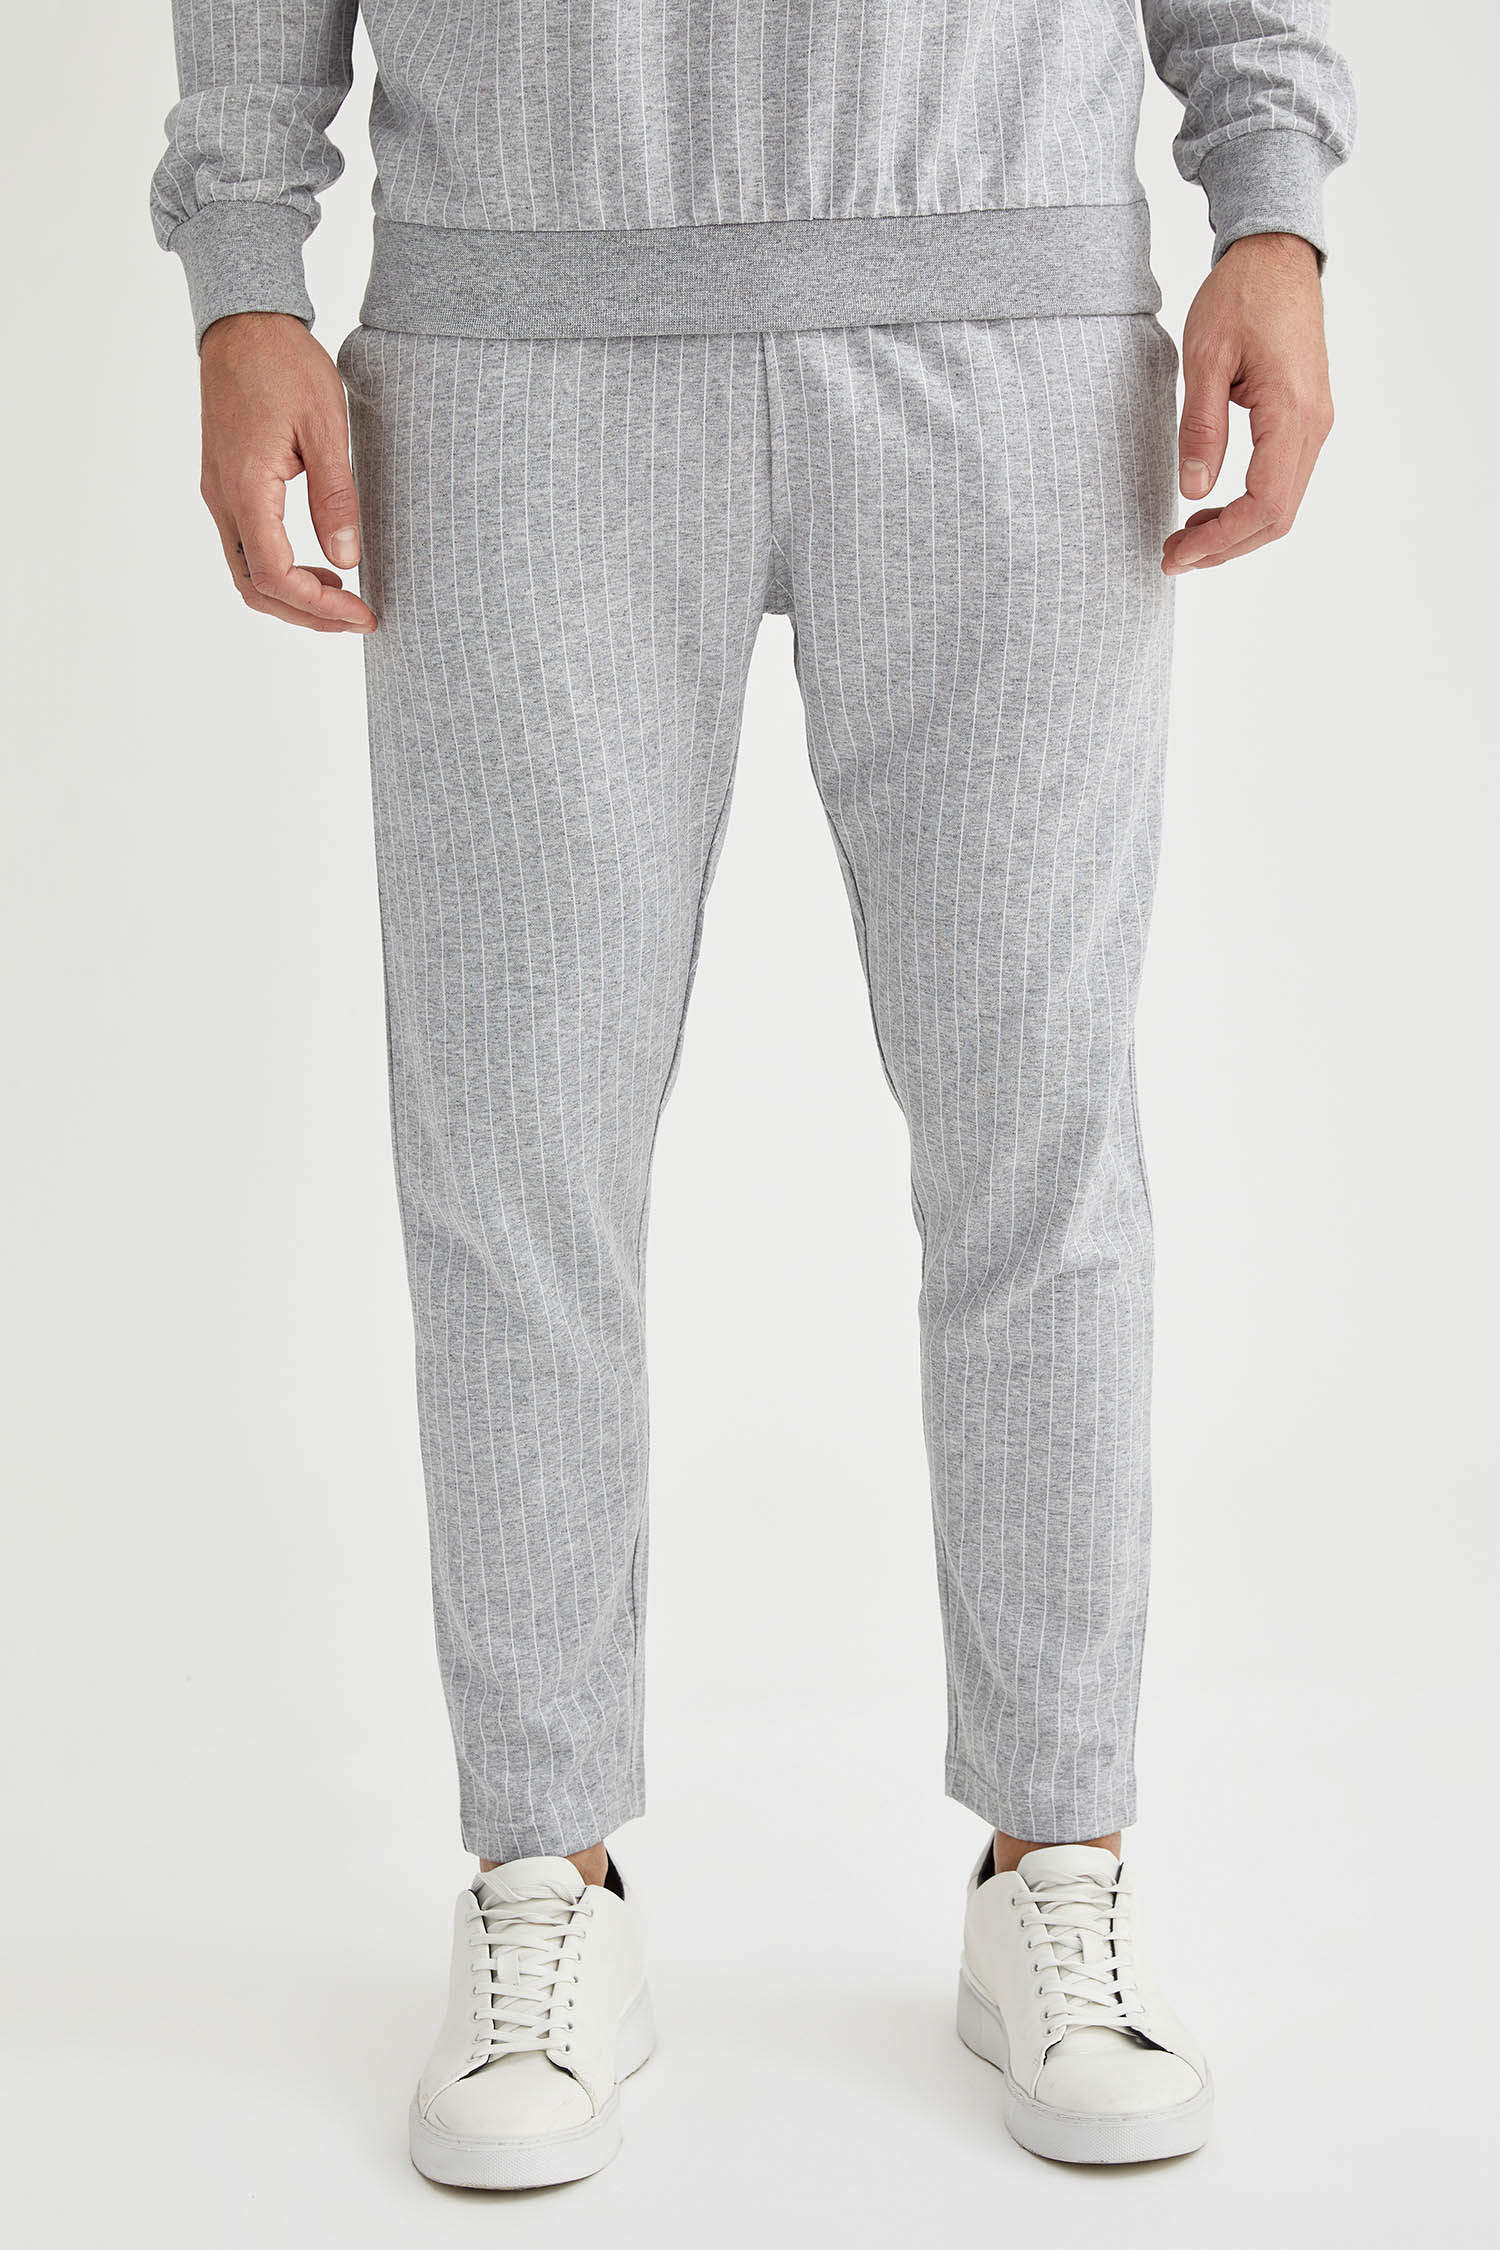 ASOS DESIGN coord straight leg knitted trouser in grey marl  ASOS